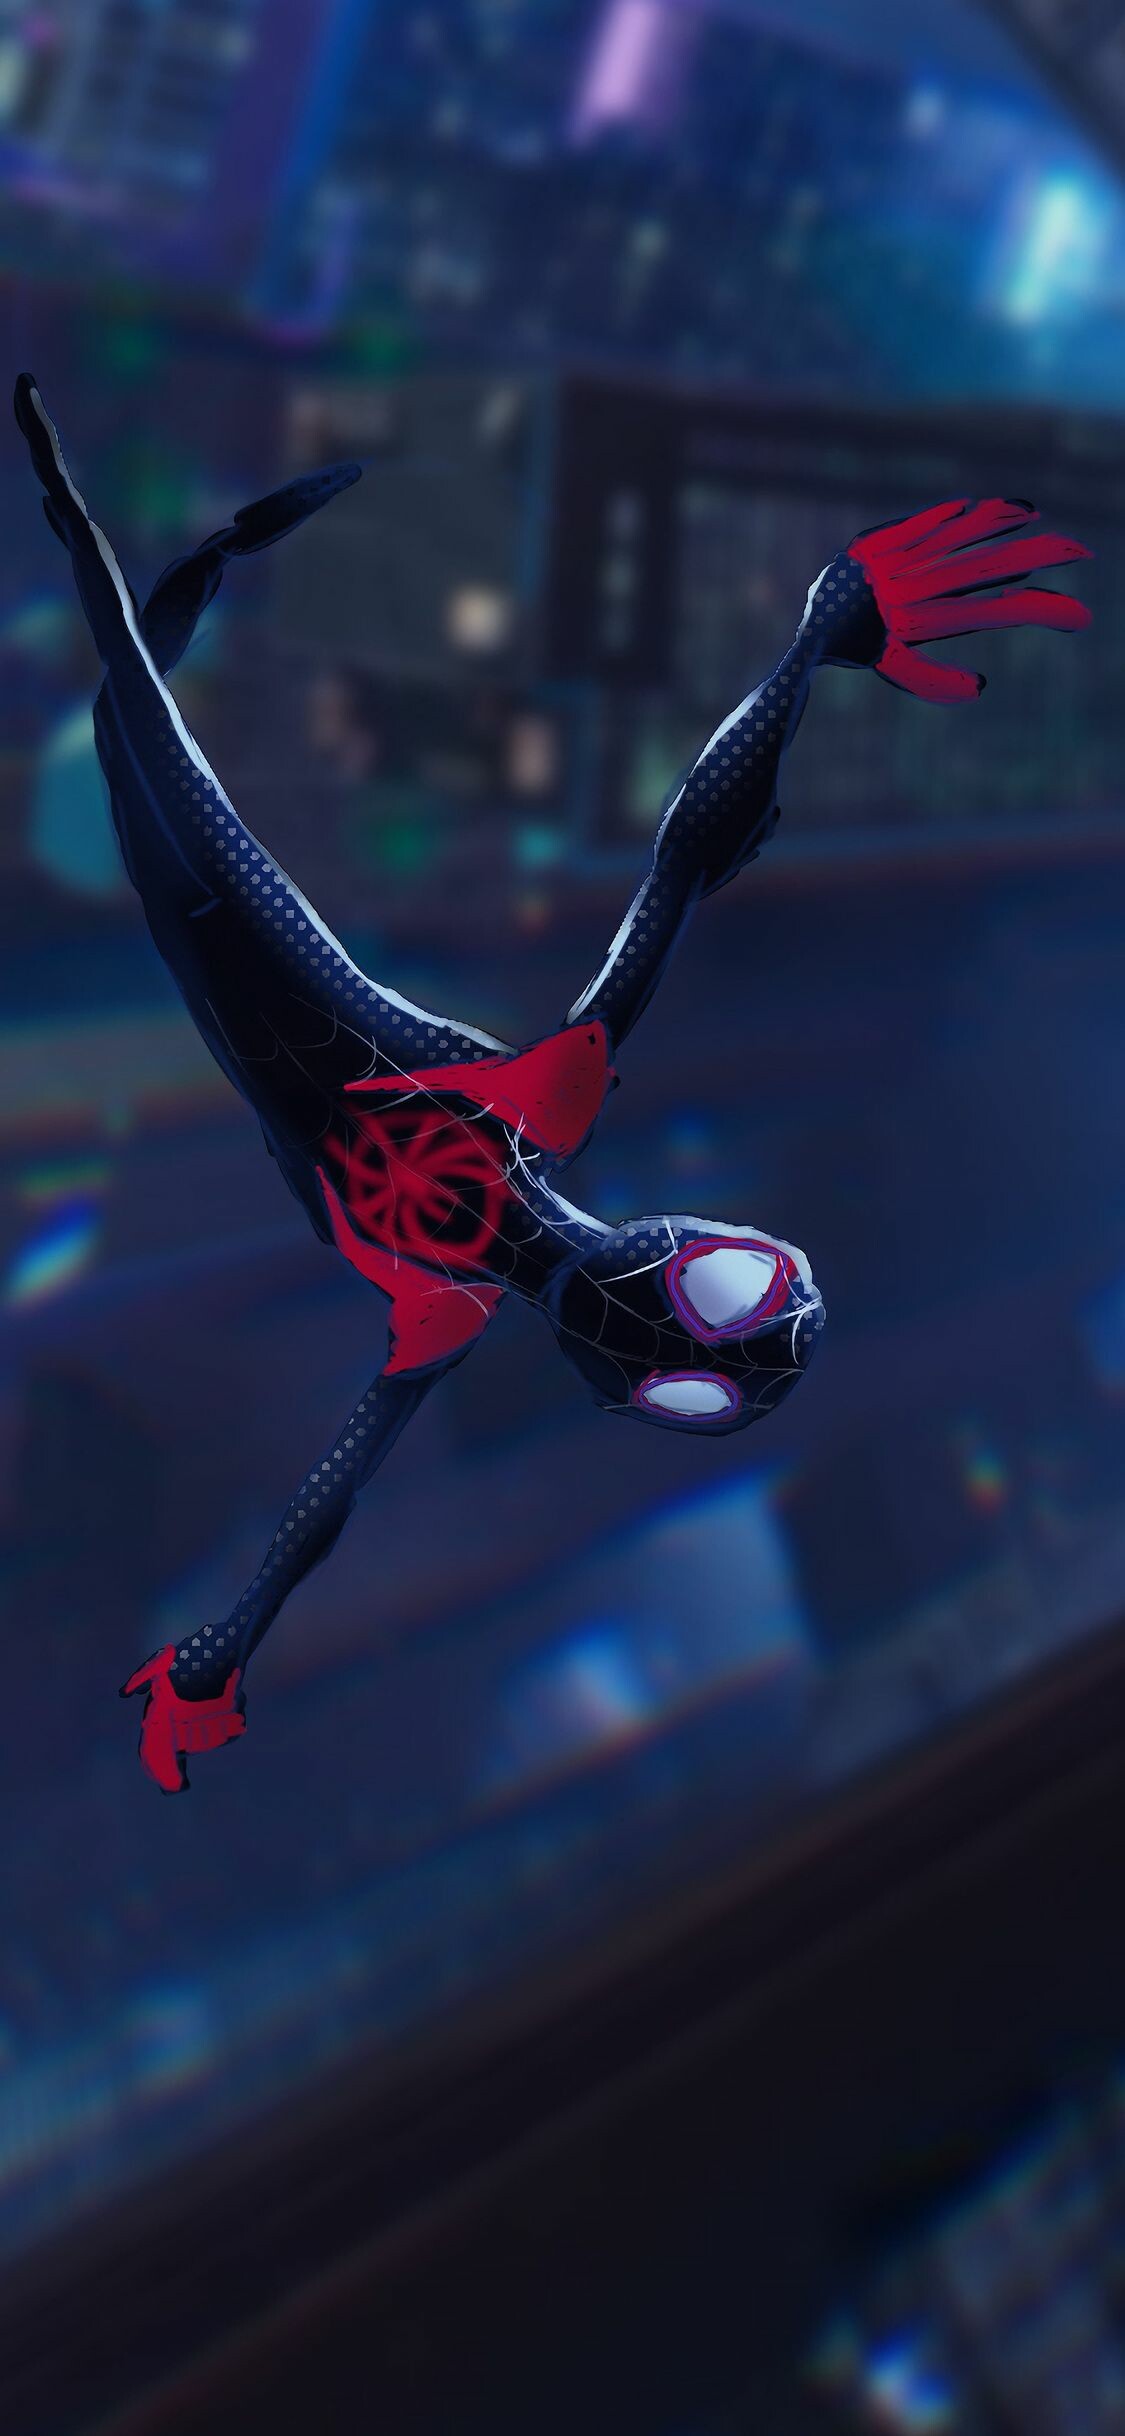 Spider-Man: Into the Spider-Verse: Received The Critics' Choice Movie Award for Best Animated Feature in 2019. 1130x2440 HD Wallpaper.